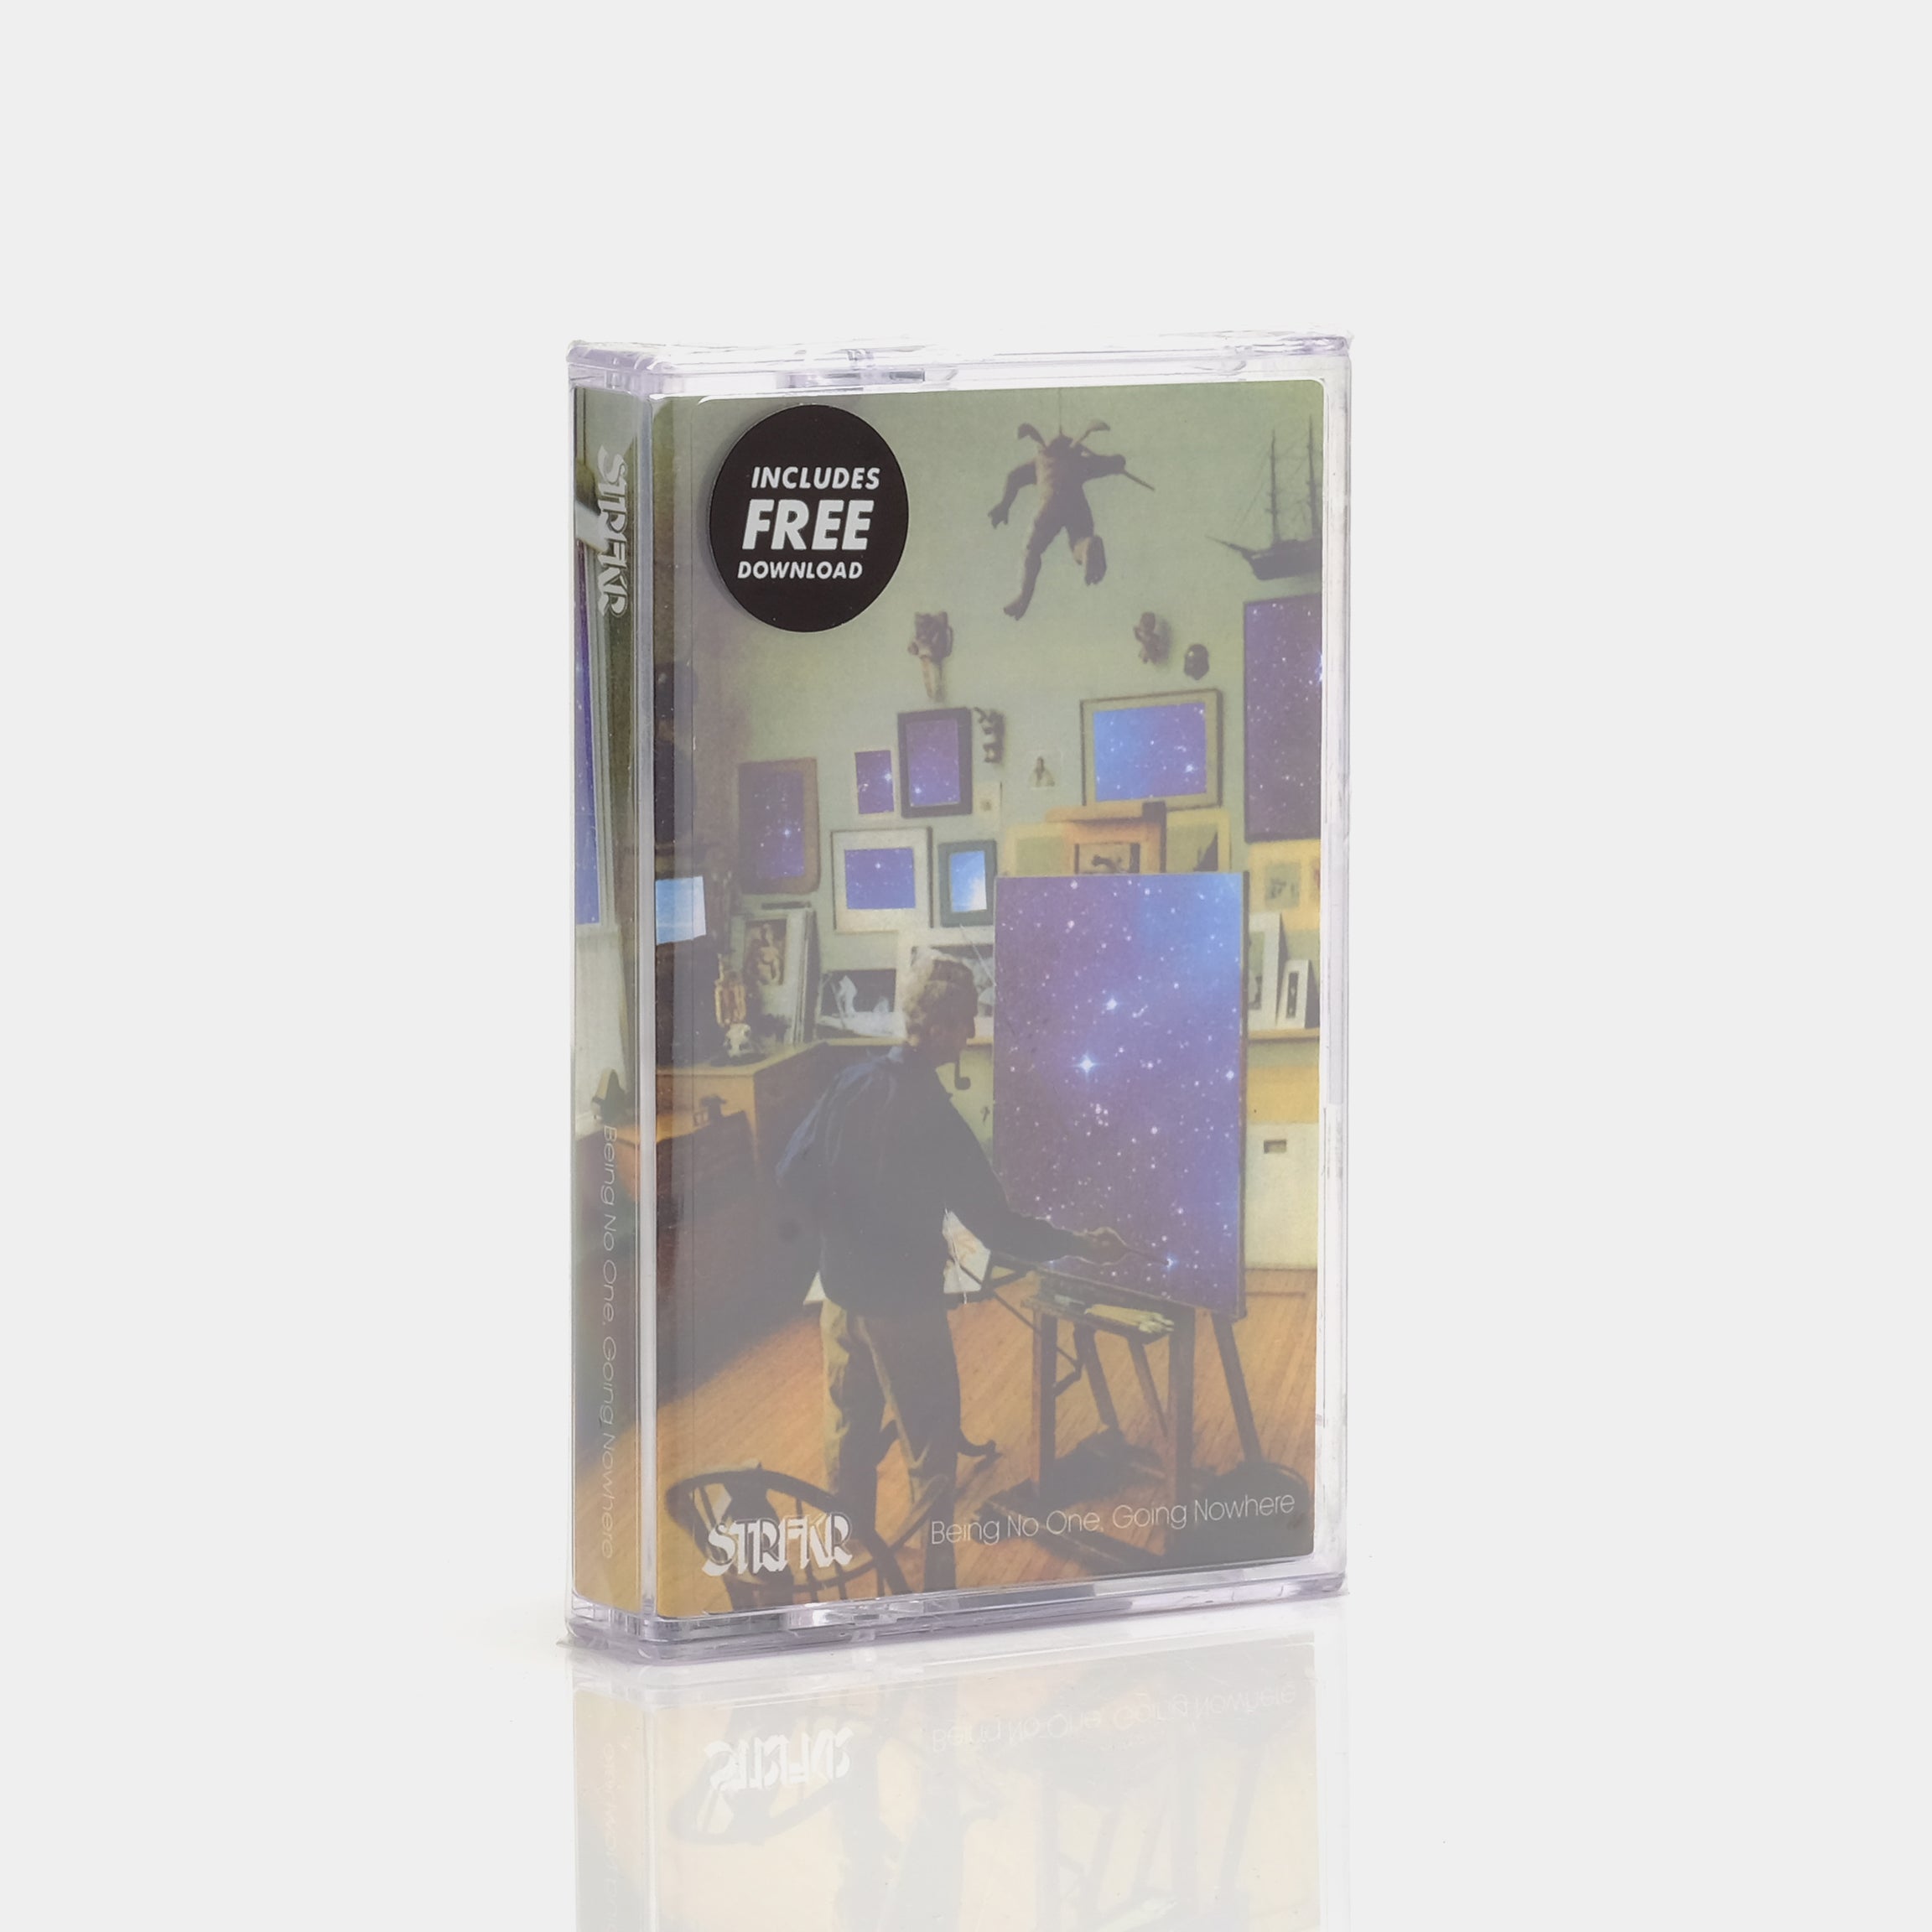 STRFKR - Being No One, Going Nowhere Cassette Tape